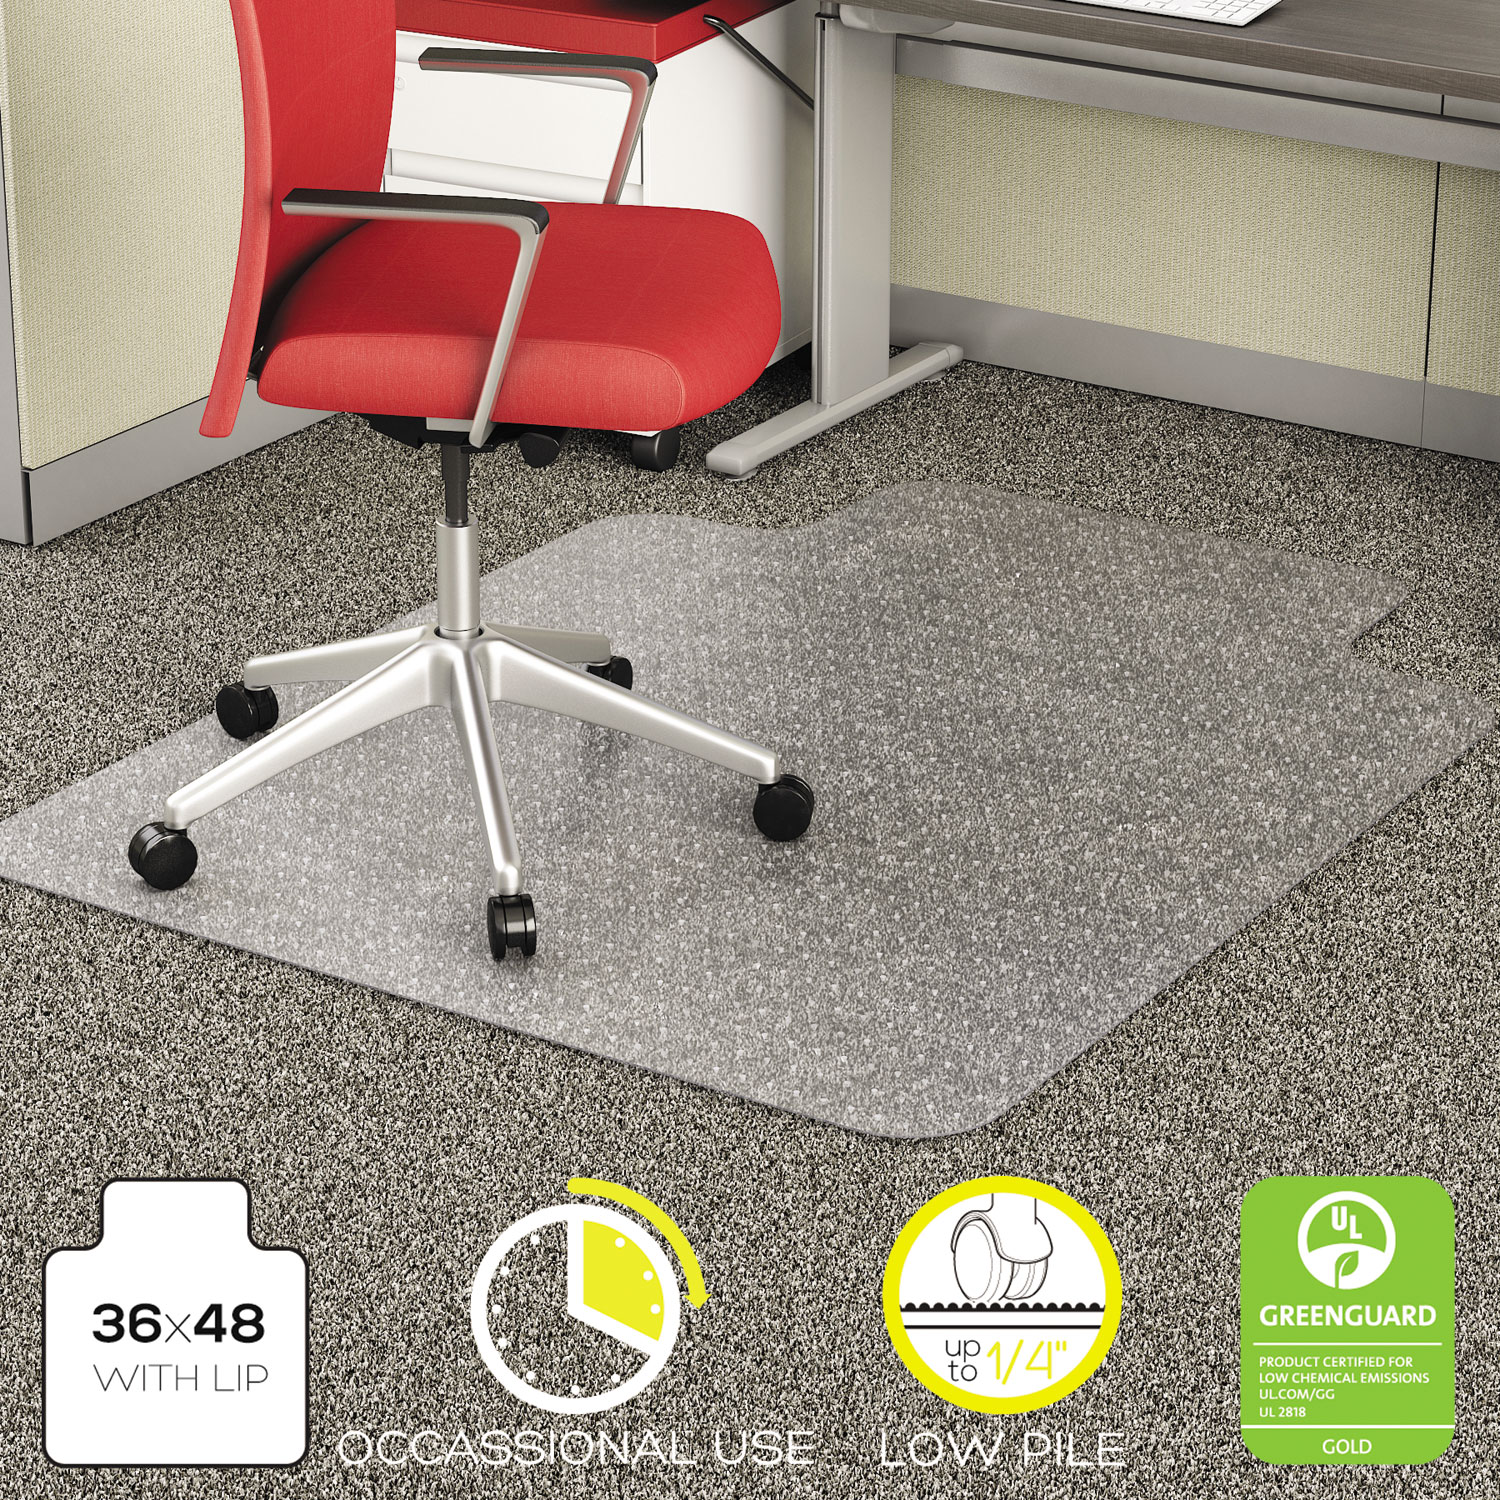  deflecto CM11112 EconoMat Occasional Use Chair Mat, Low Pile Carpet, Flat, 36 x 48, Lipped, Clear (DEFCM11112) 